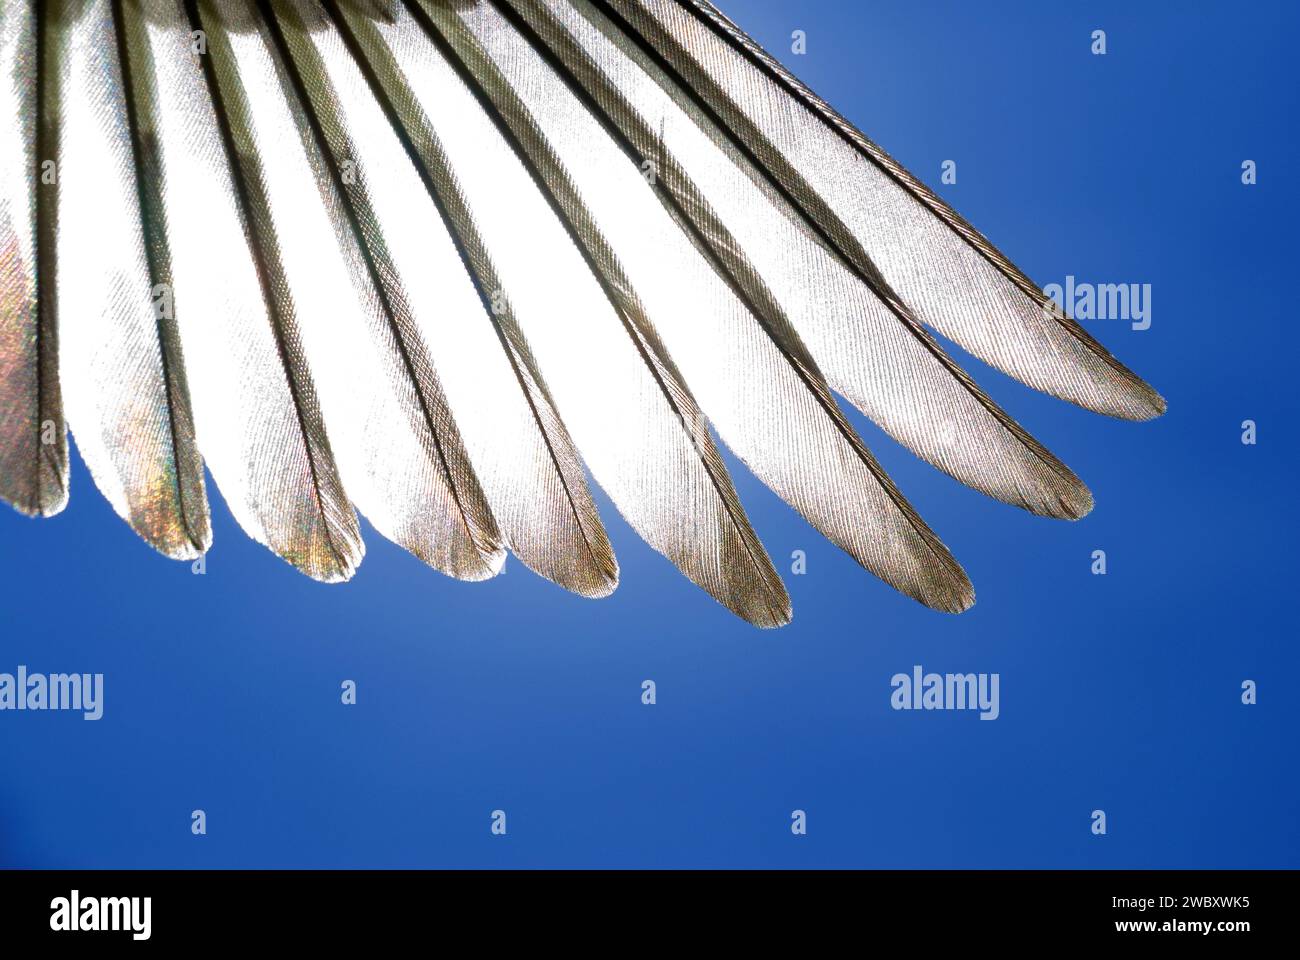 Detail of wing feathers of a small songbird against blue sky in backlight Stock Photo